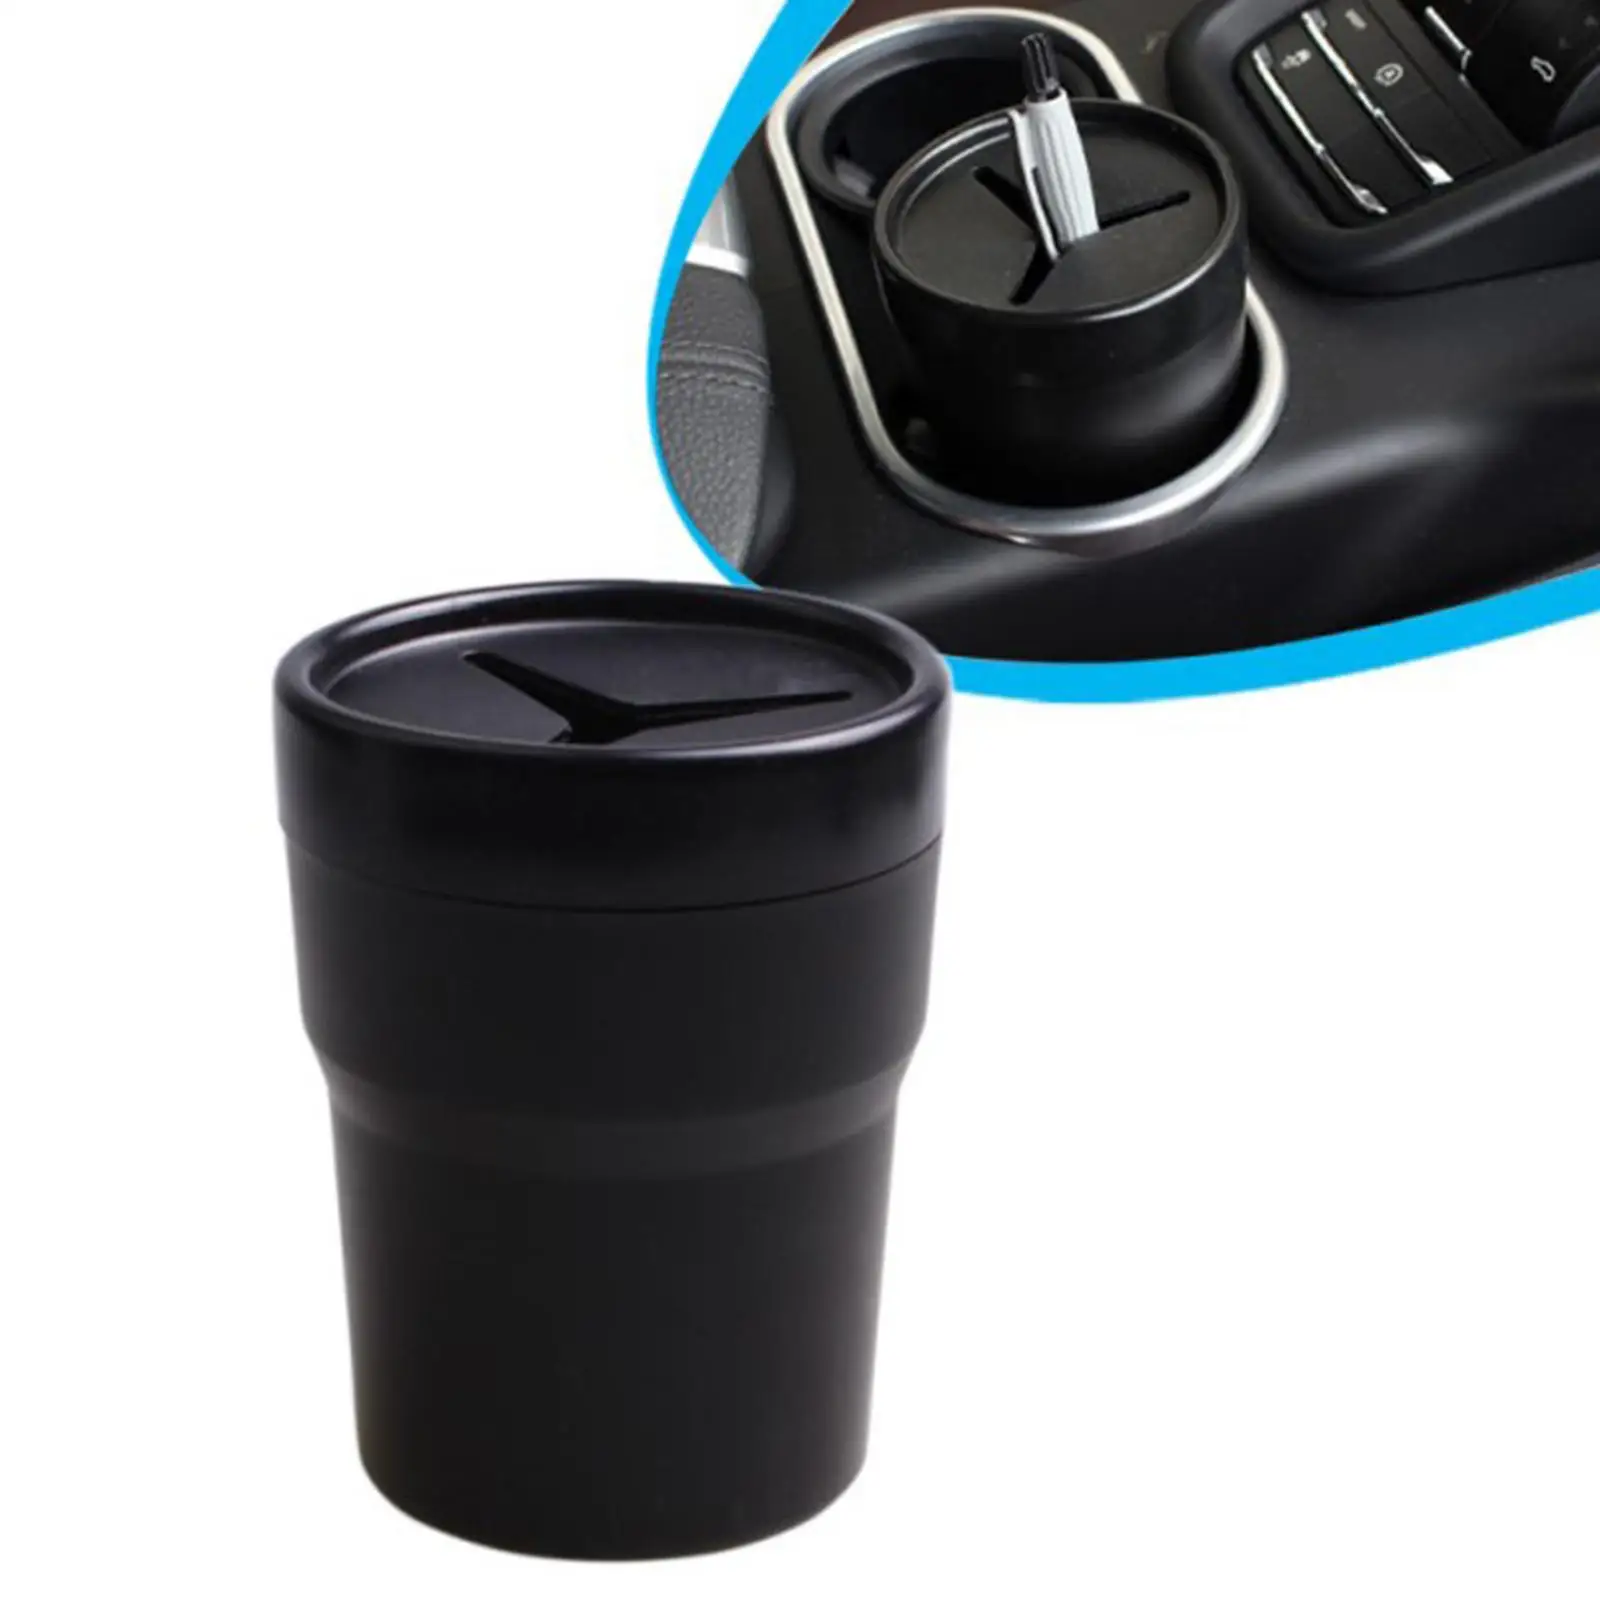 Car Trash Can Bin Luxury Vehicle Waste Basket Container for Travelling